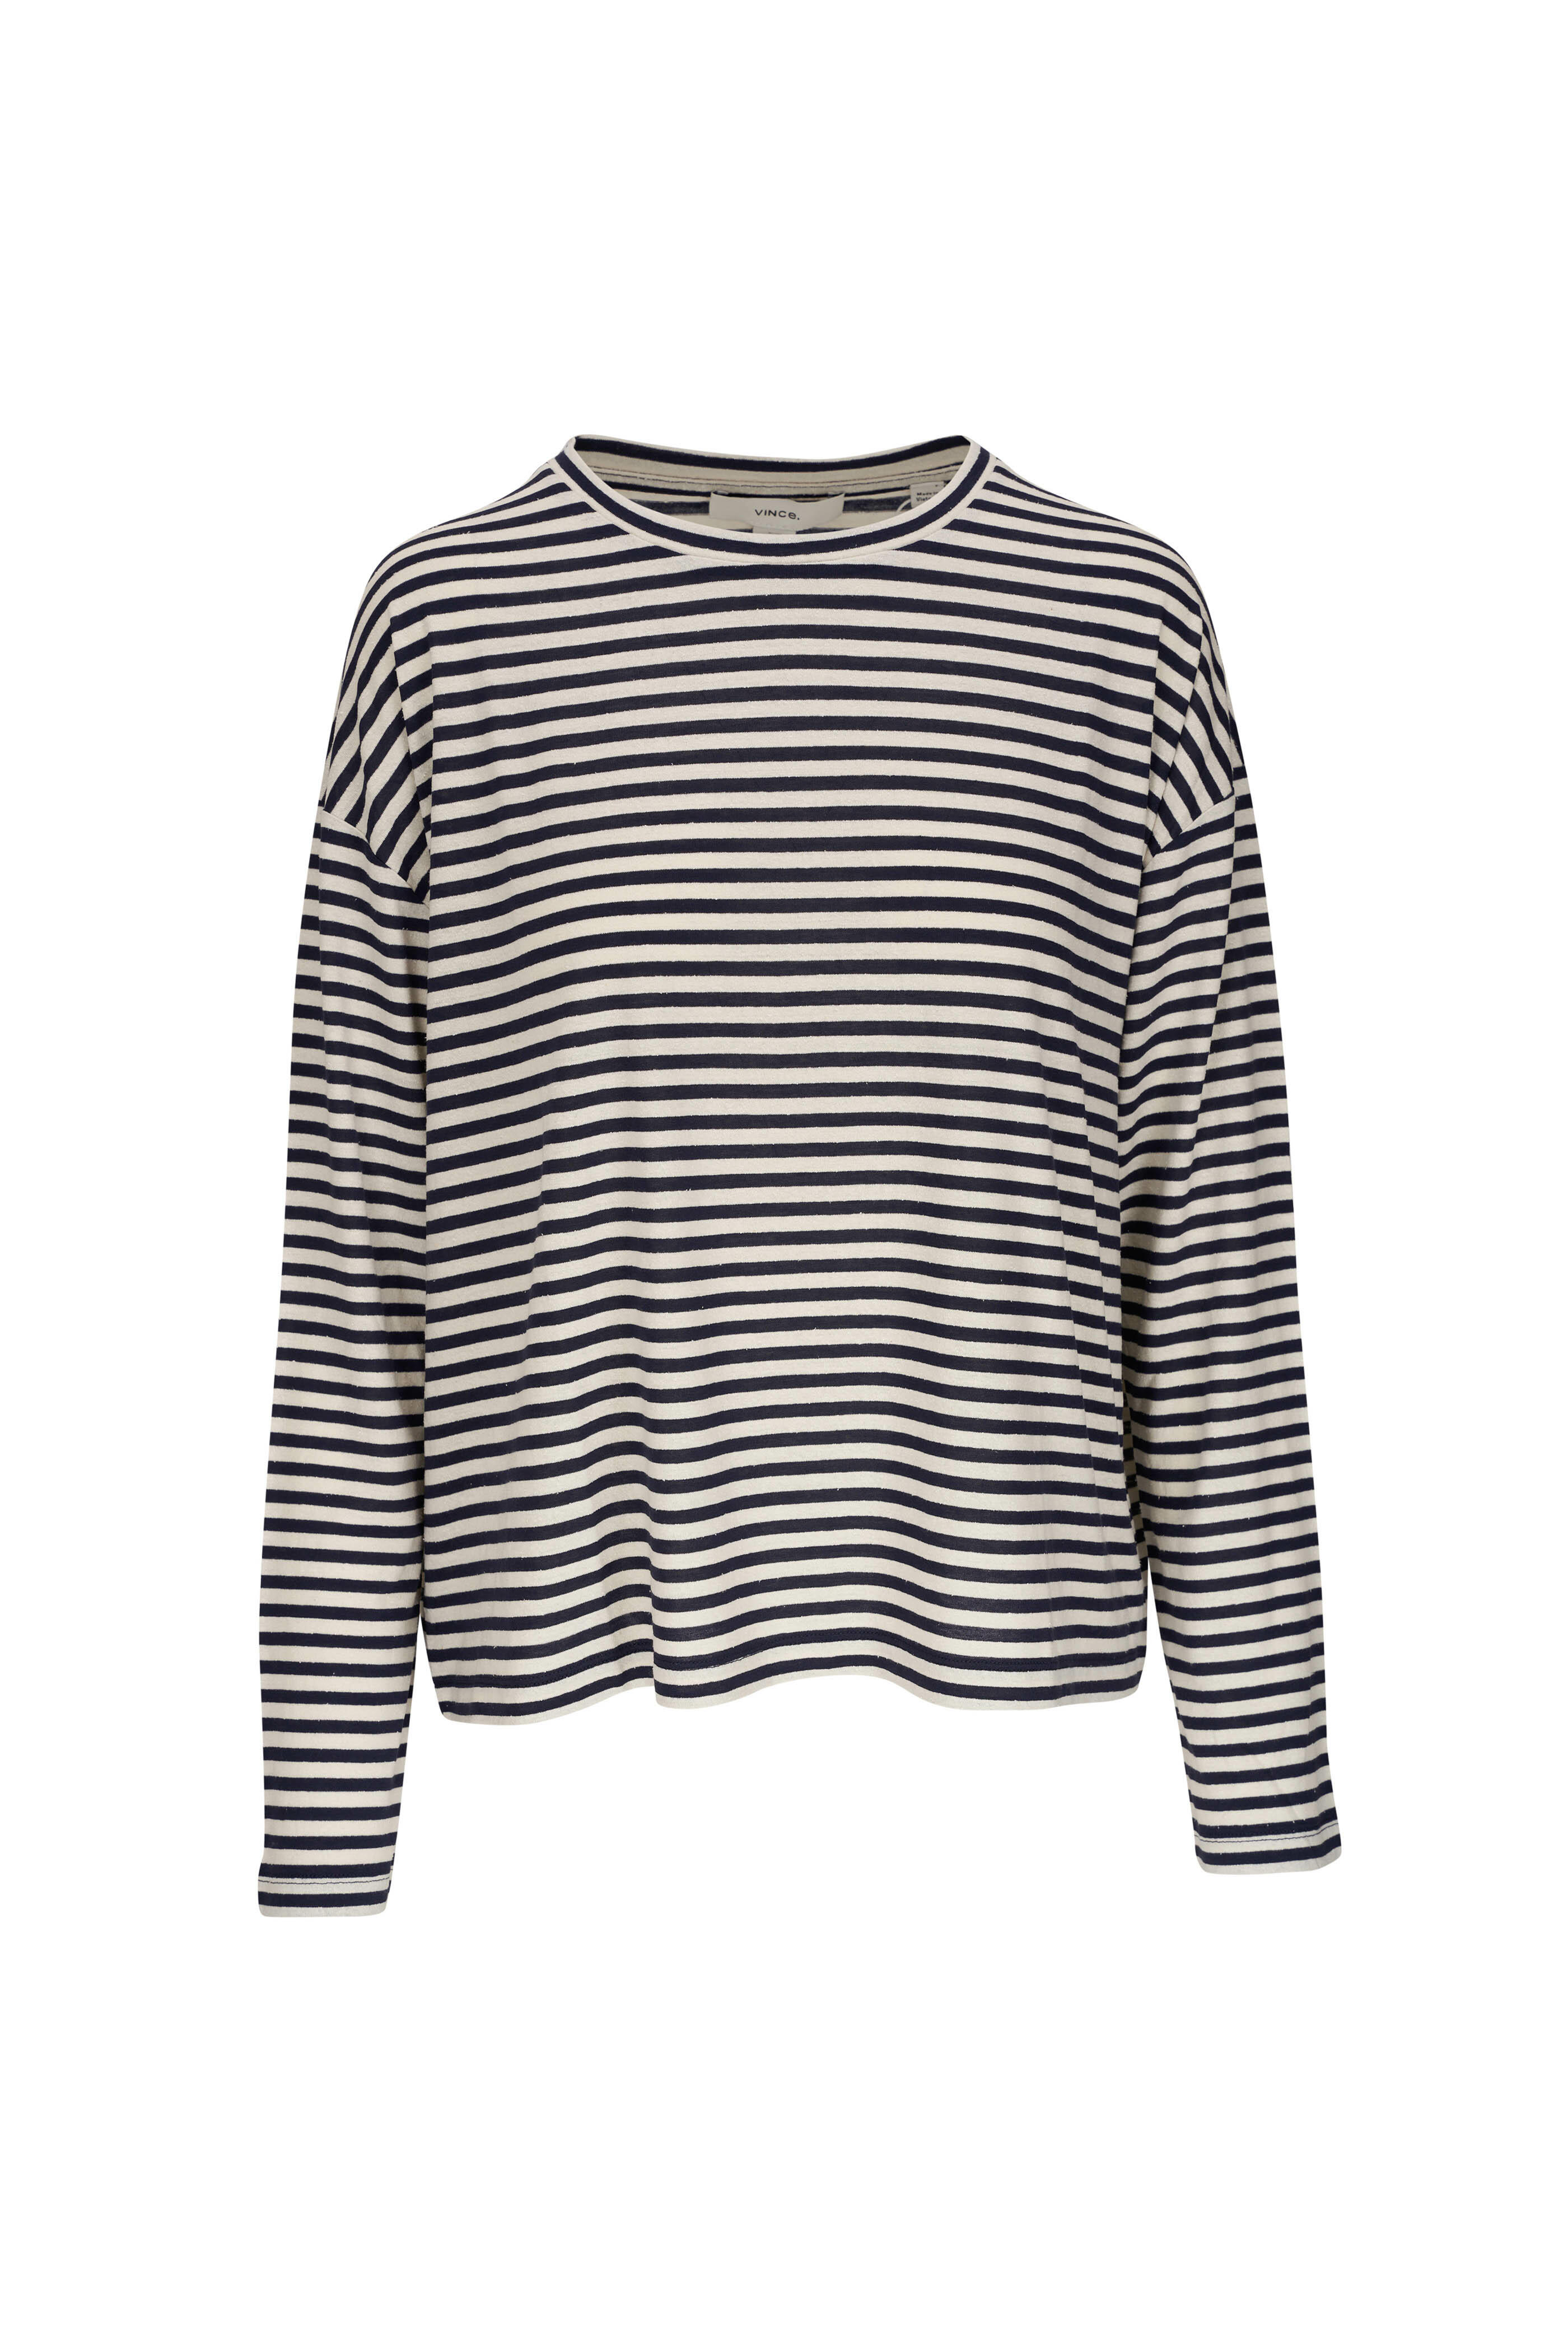 Enti Clothing long sleeve striped top